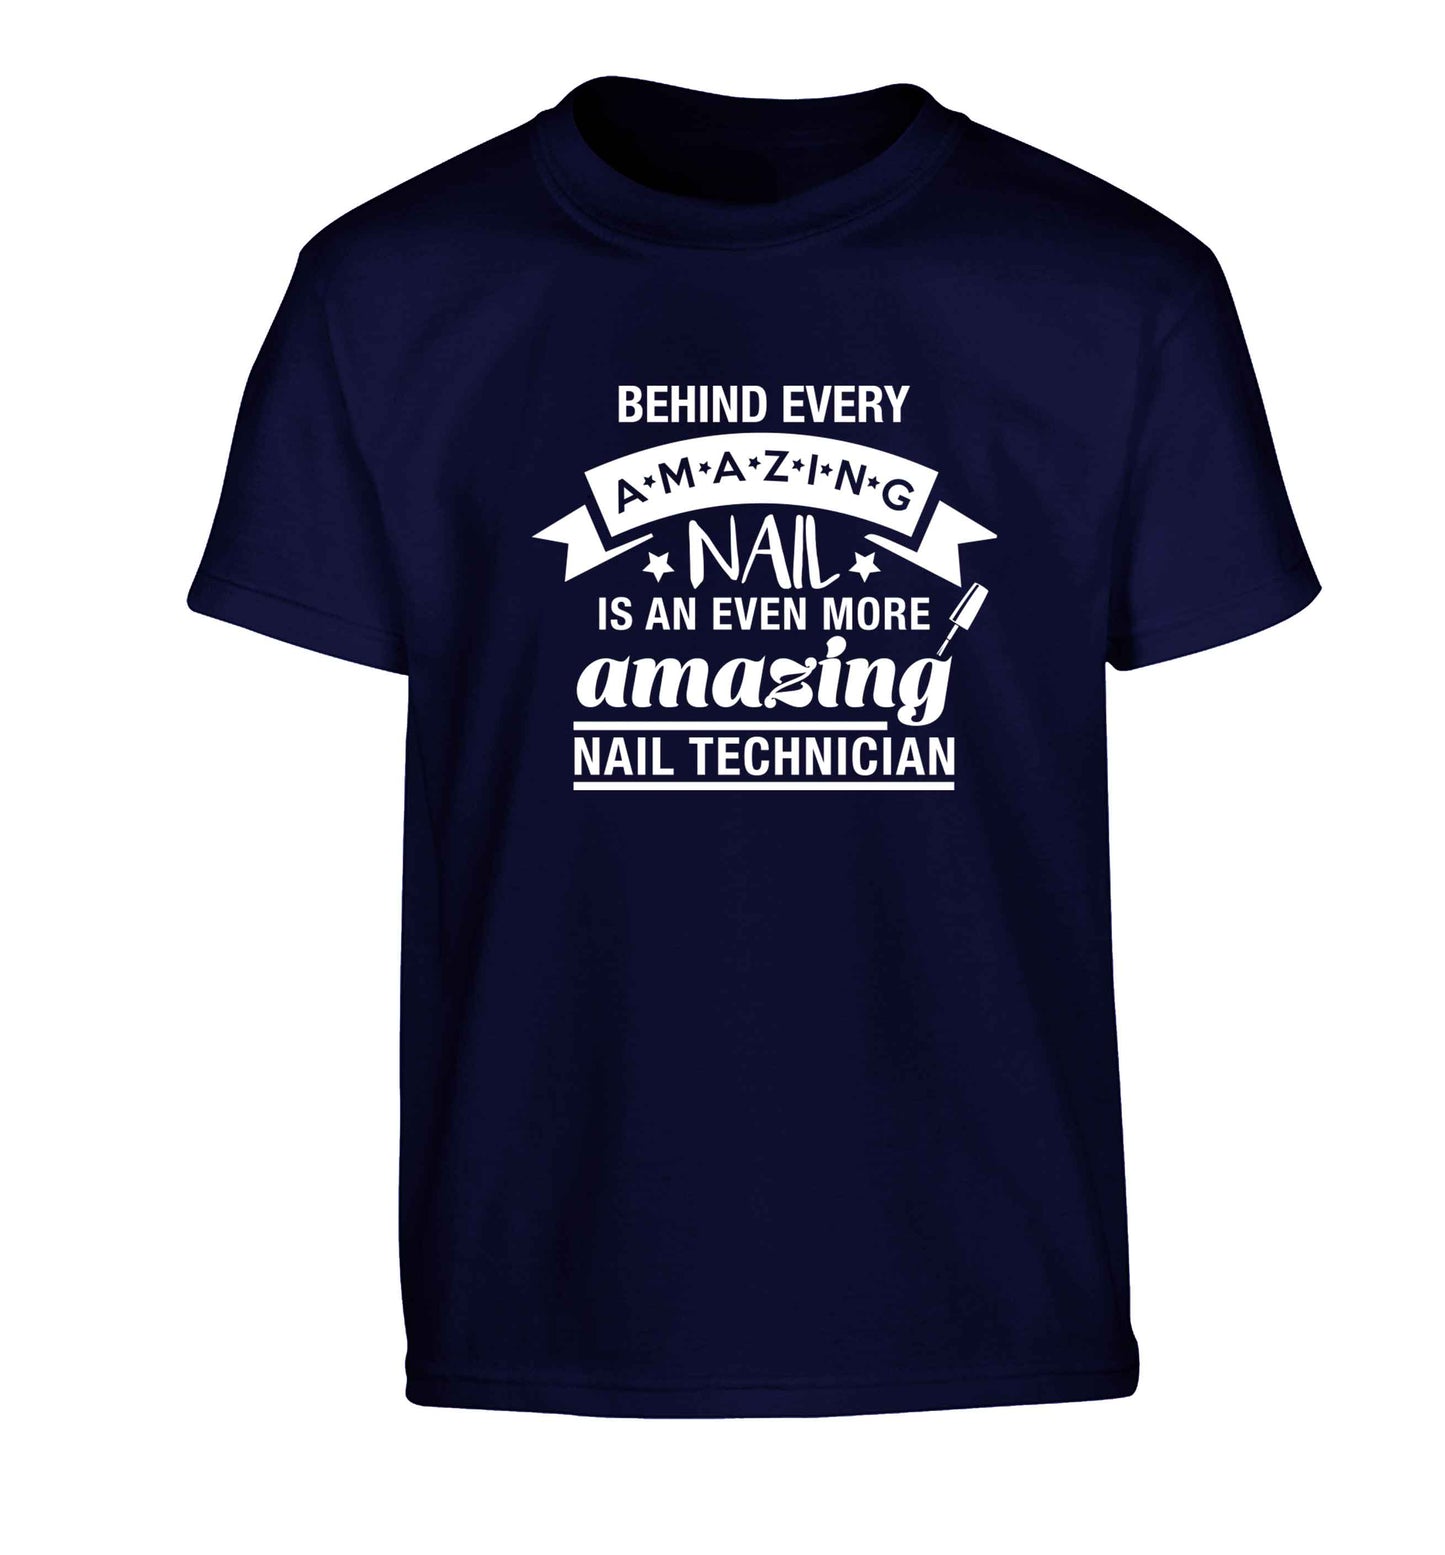 Behind every amazing nail is an even more amazing nail technician Children's navy Tshirt 12-13 Years